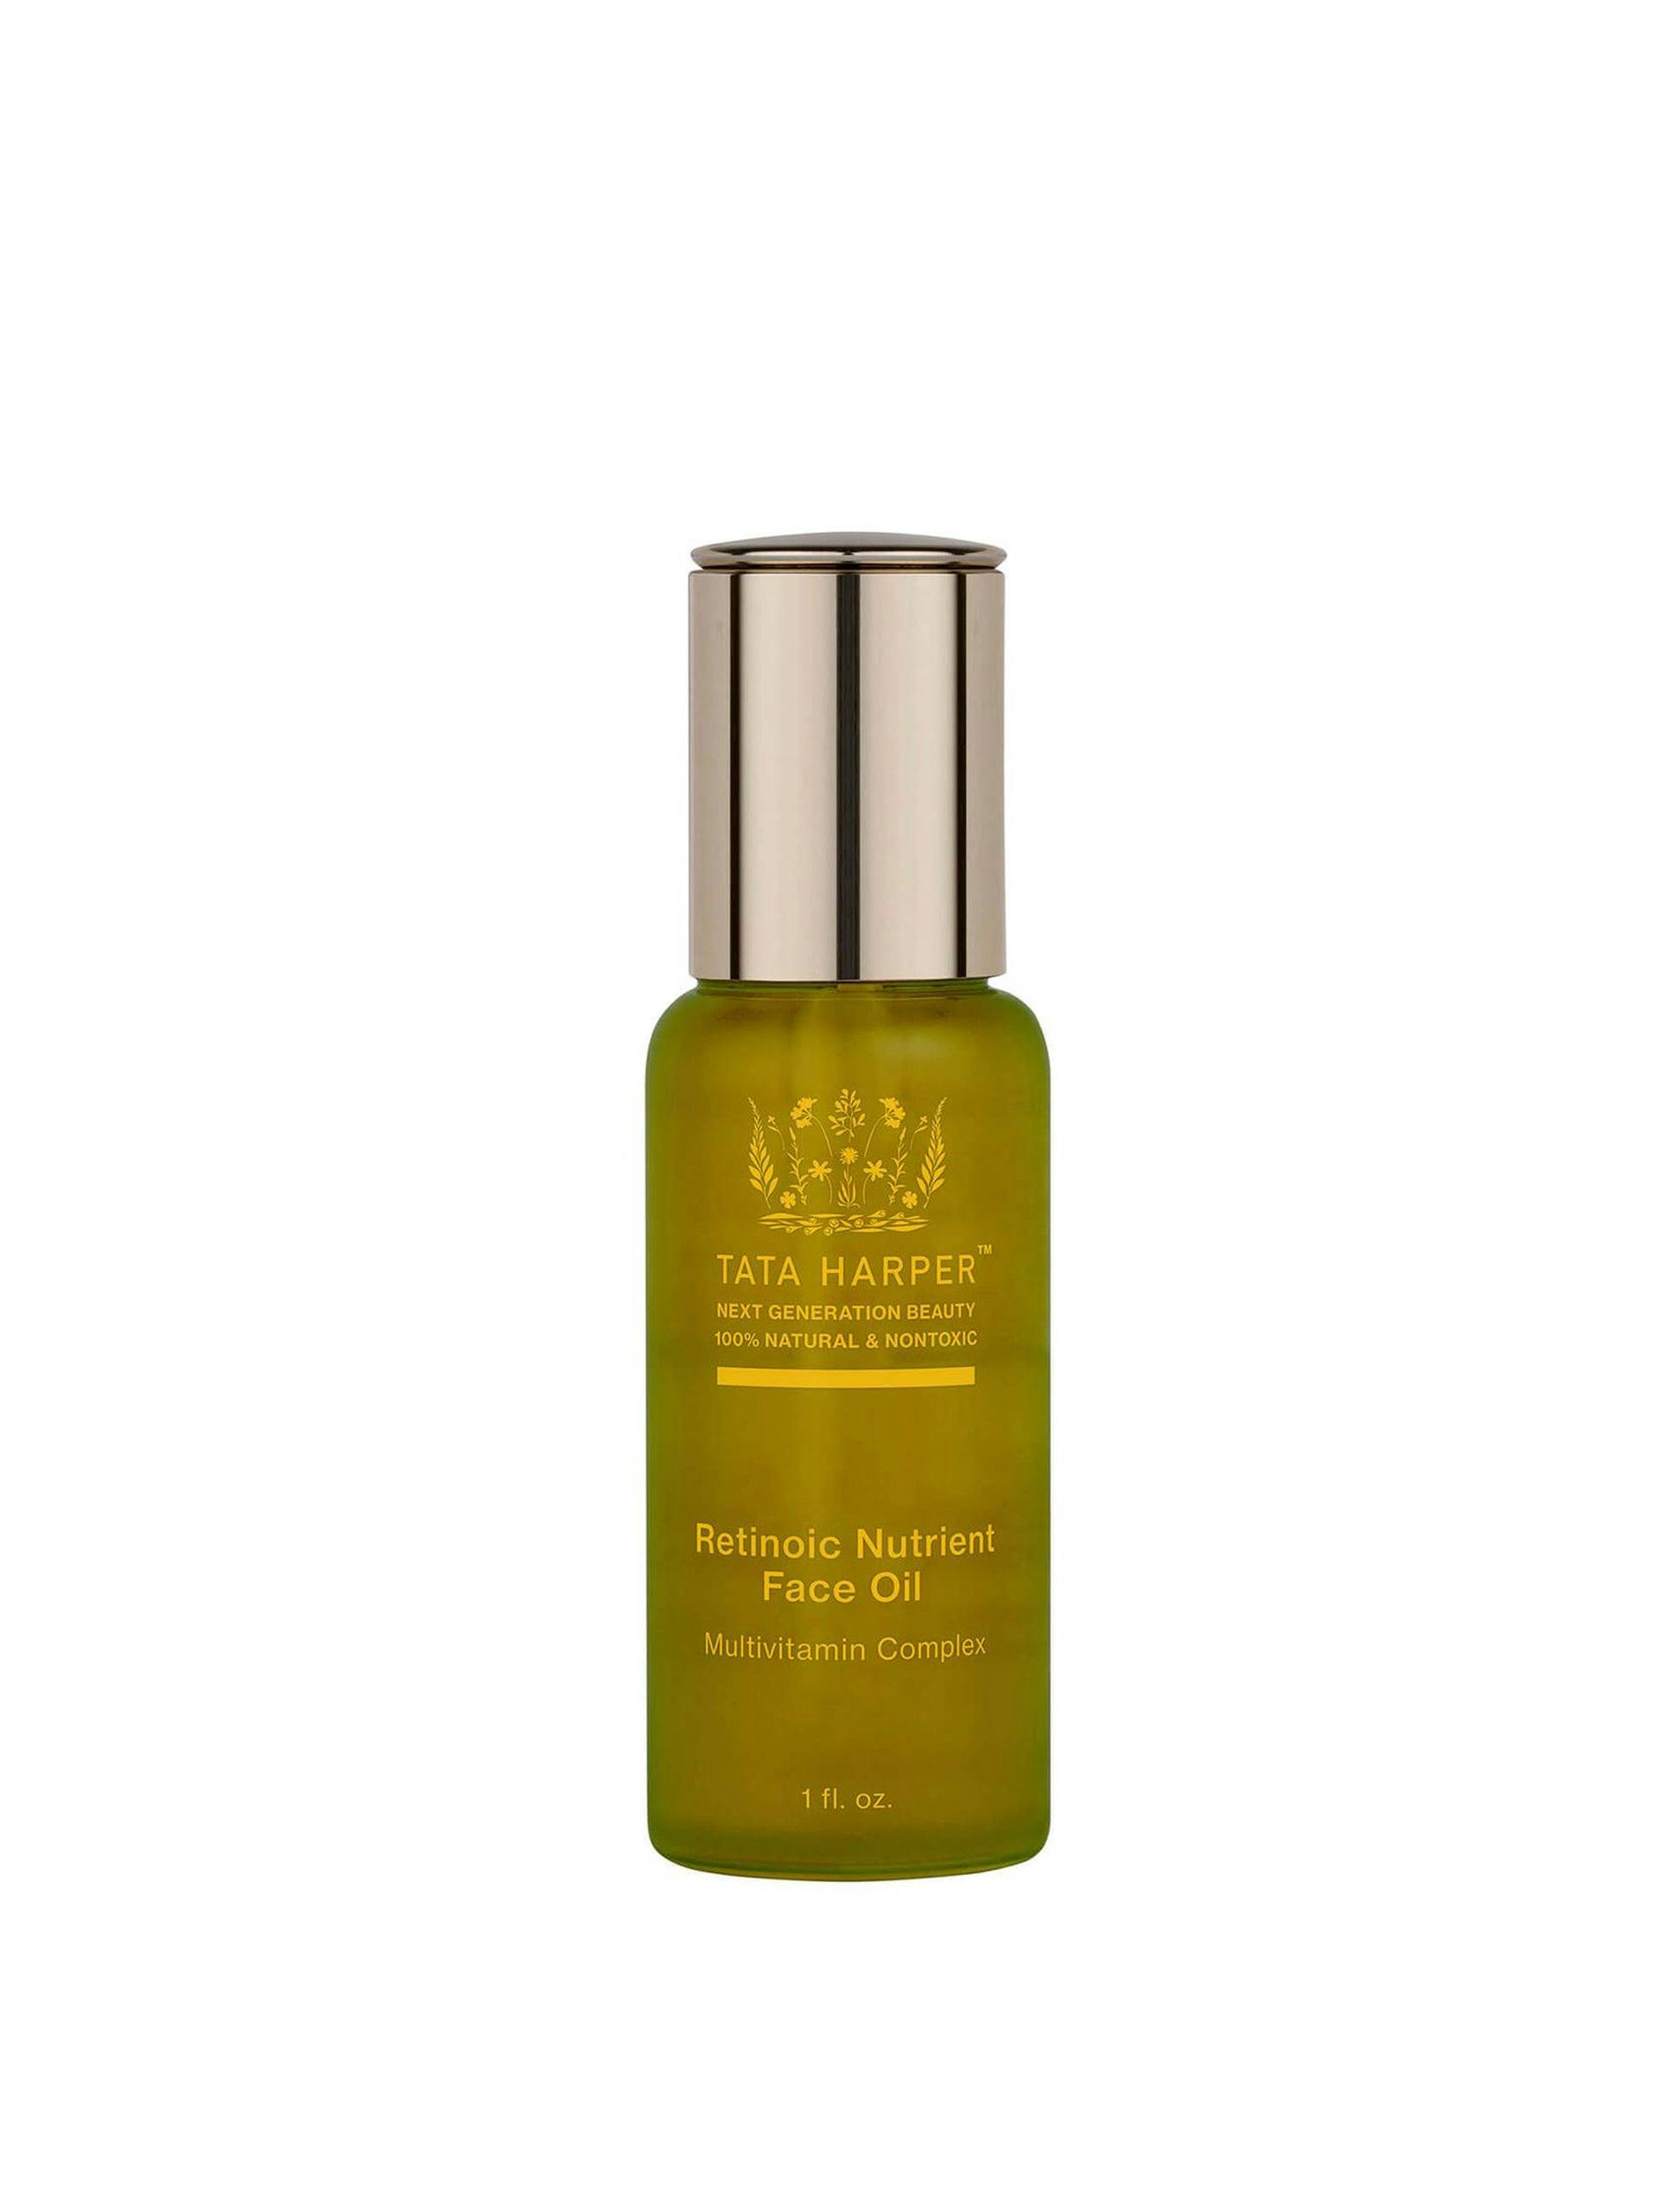 Retinoic nutrient face oil